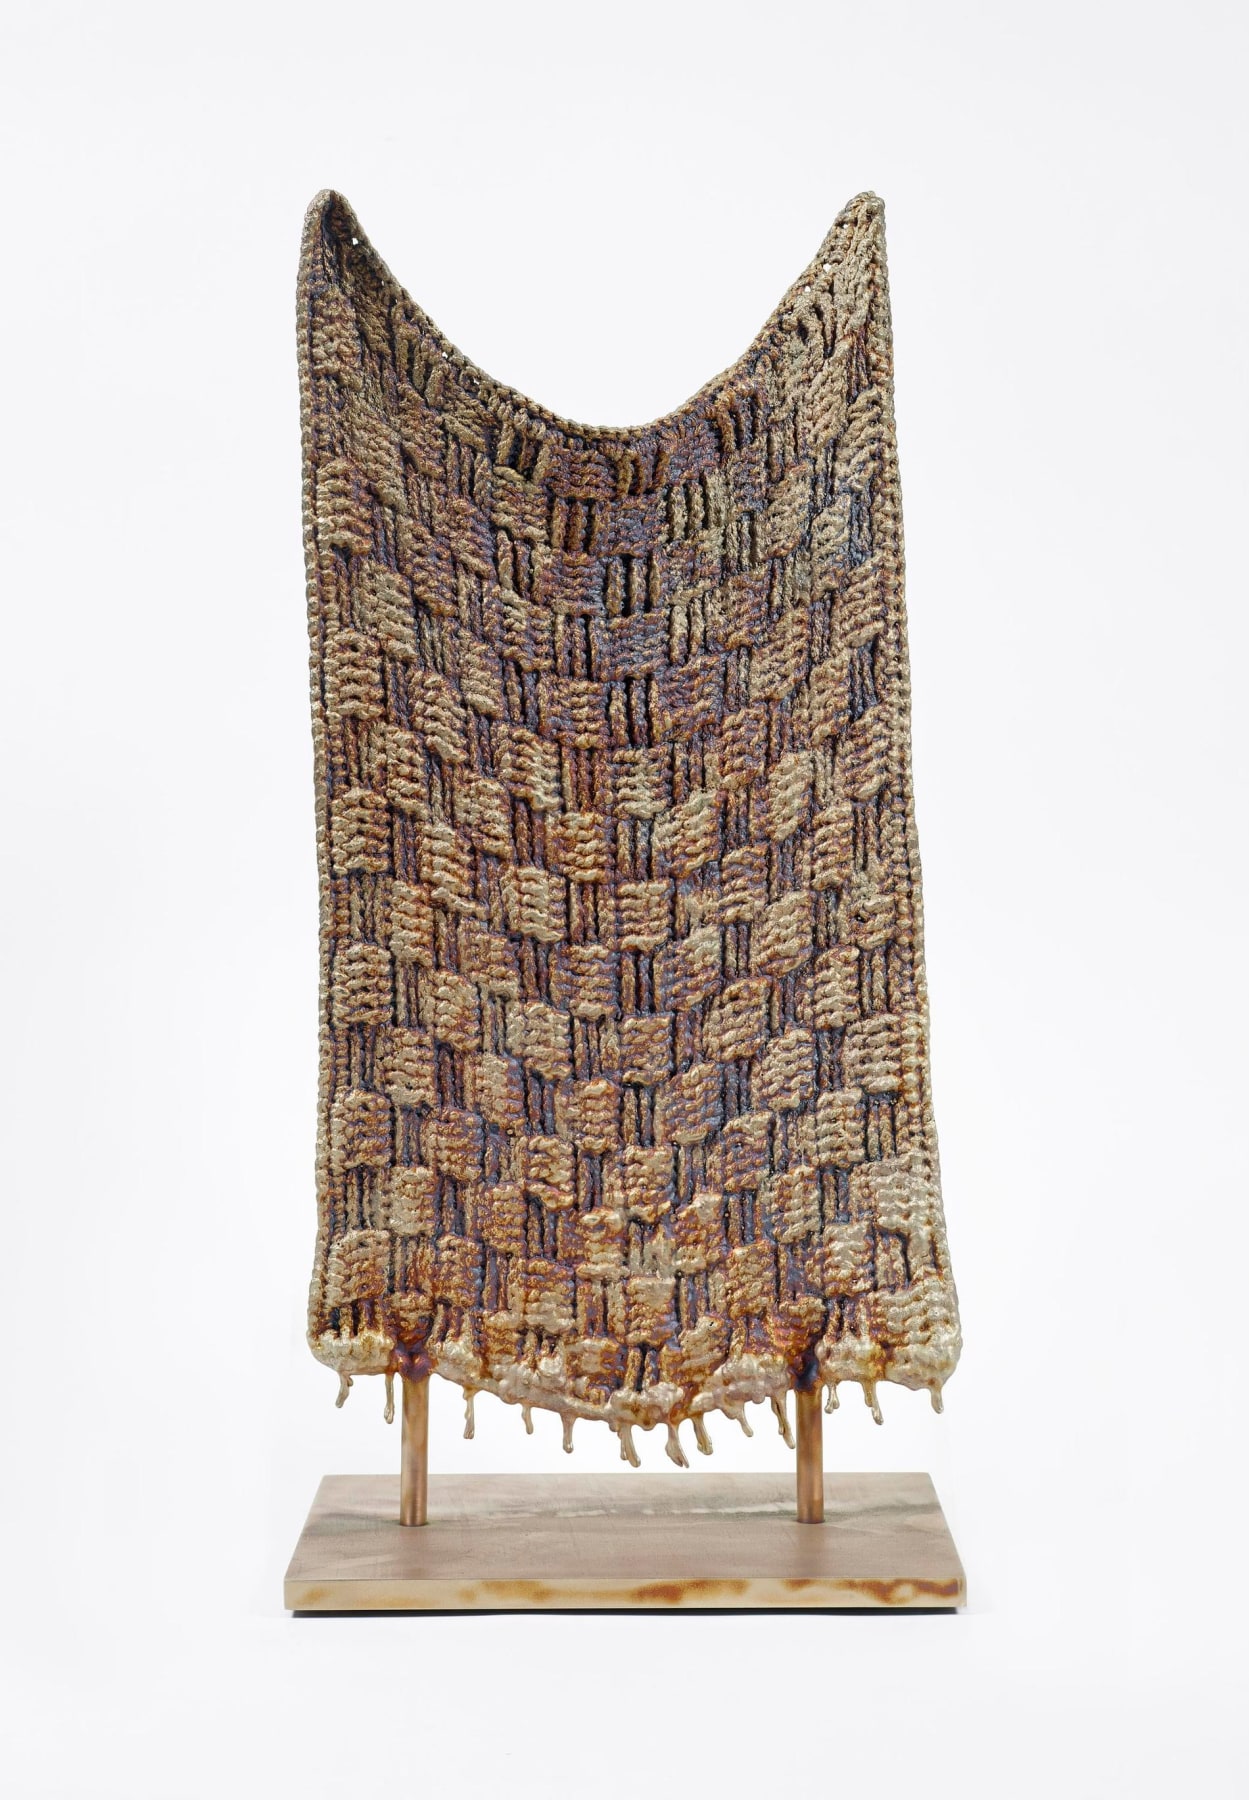 bronze sculpture shaped like a knitted quilt